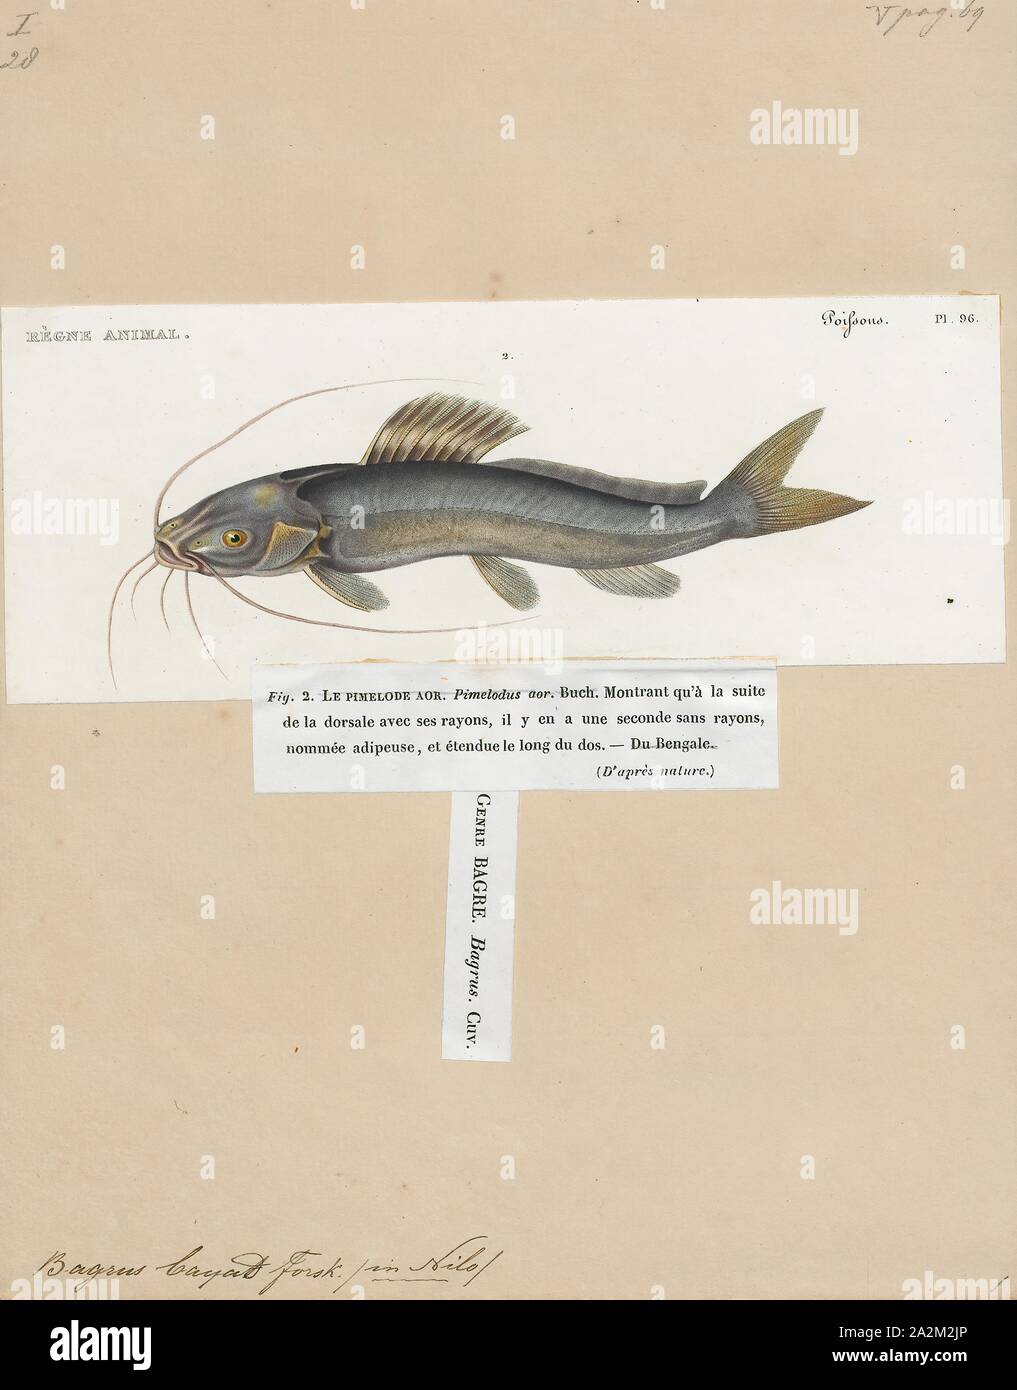 Bagrus bayad, Print, Bagrus is a genus of bagrid catfishes. These are relatively large catfished found in freshwater habitats in Africa, except for the virtually unknown B. tucumanus from South America, which likely is a synonym of Luciopimelodus pati., 1700-1880 Stock Photo